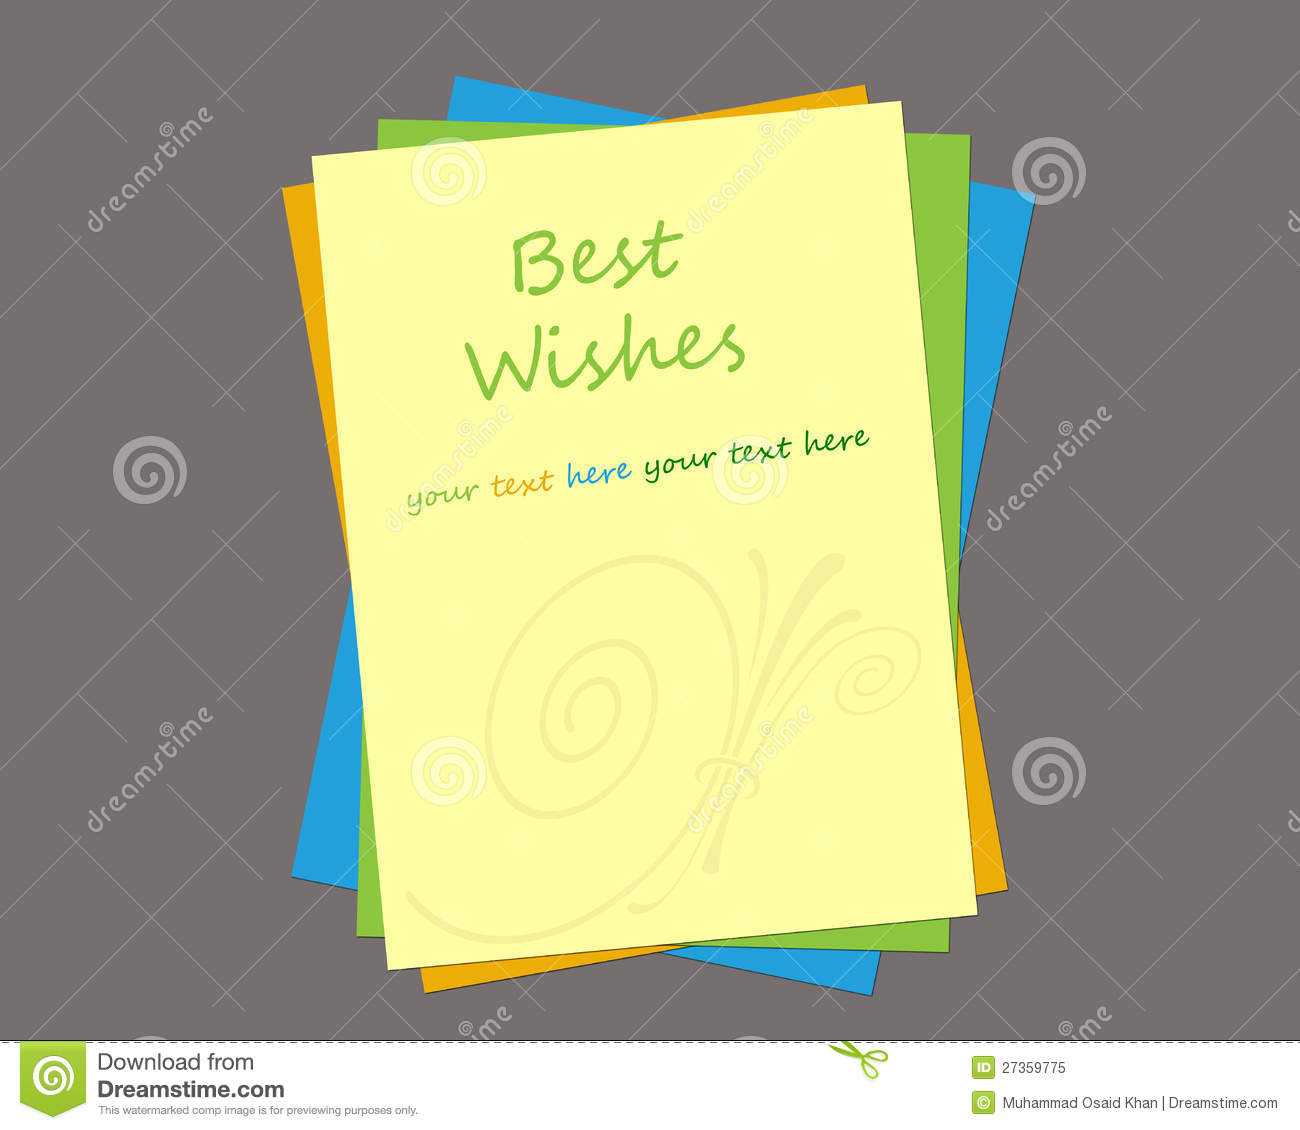 Greeting Card Template Stock Illustration. Illustration Of Pertaining To Free Blank Greeting Card Templates For Word